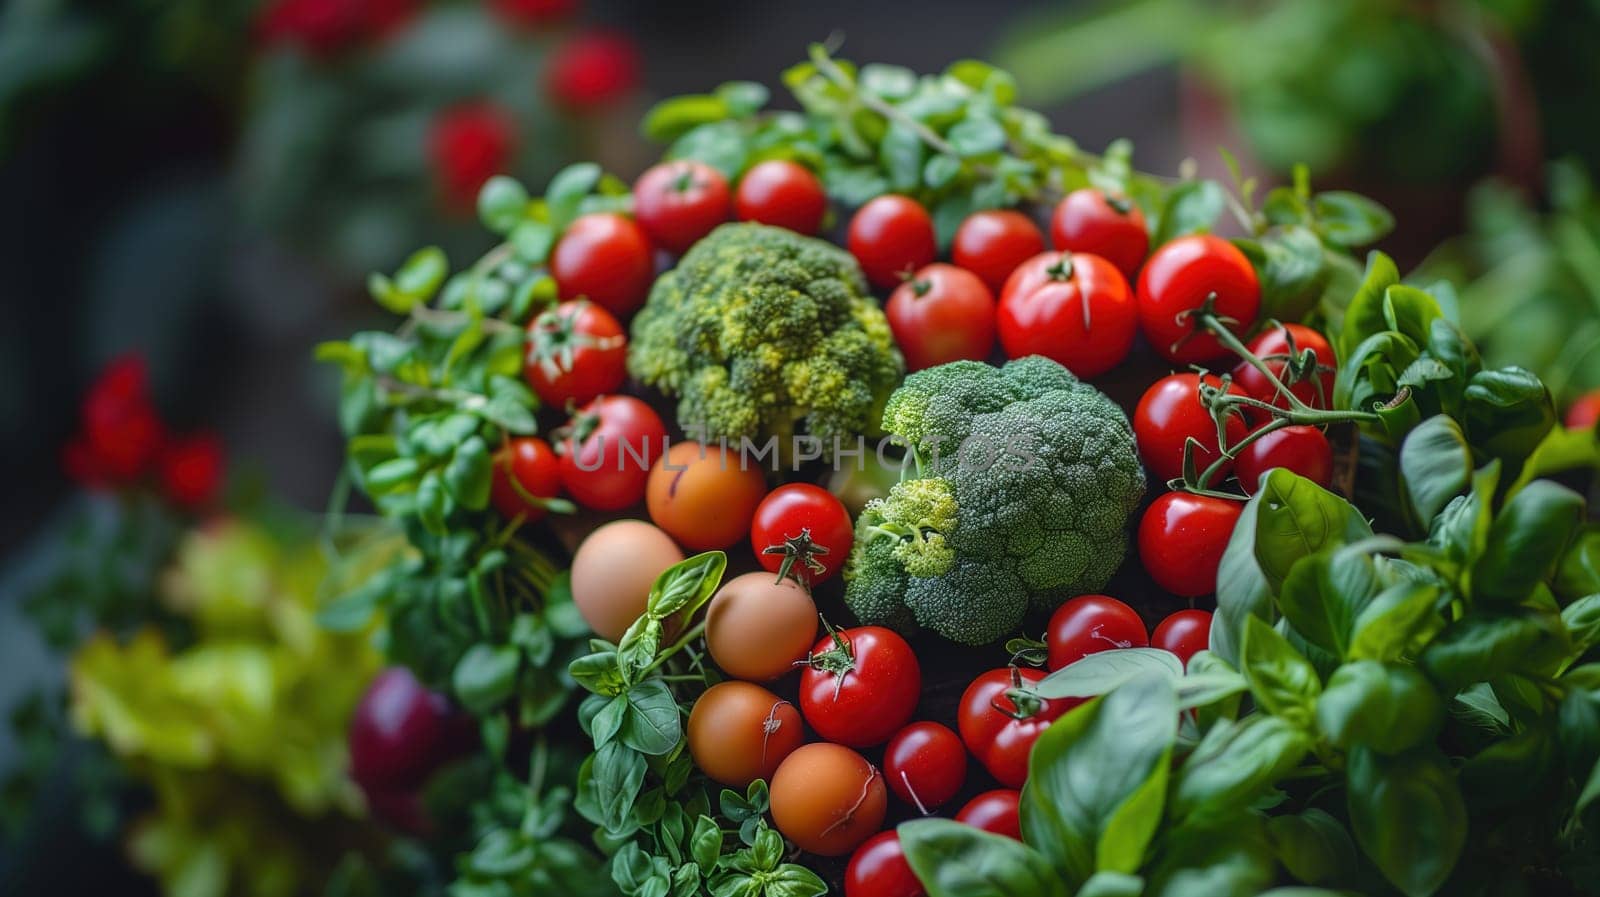 Various types of fruits and vegetables are creatively arranged in a colorful and vibrant display. The assortment includes carrots, apples, bananas, tomatoes, lettuce, grapes, oranges, cucumbers, bell peppers, and more.